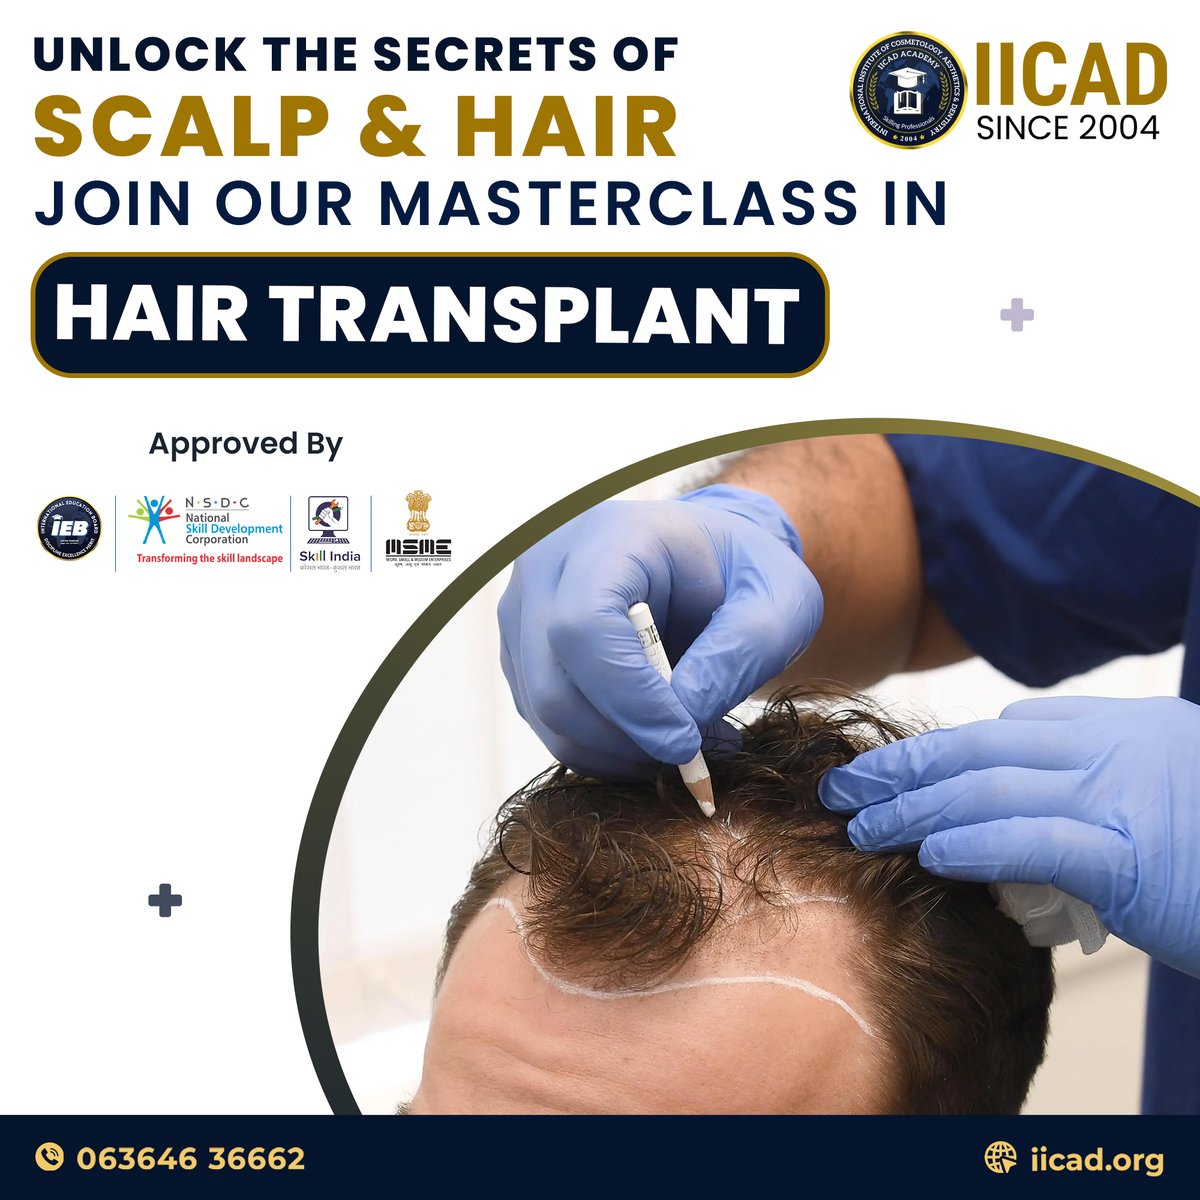 🌟Discover Hair Restoration Excellence! 🌟 Join our Masterclass to unlock the secrets of healthy hair growth and redefine confidence. 💇‍♀️🚀

🌏 iicad.org
📲 063646 36662 / 9606110983
📍goo.gl/maps/7biy7hn5J…

#HairTransplant #hairrestoration #Masterclass #IICAD